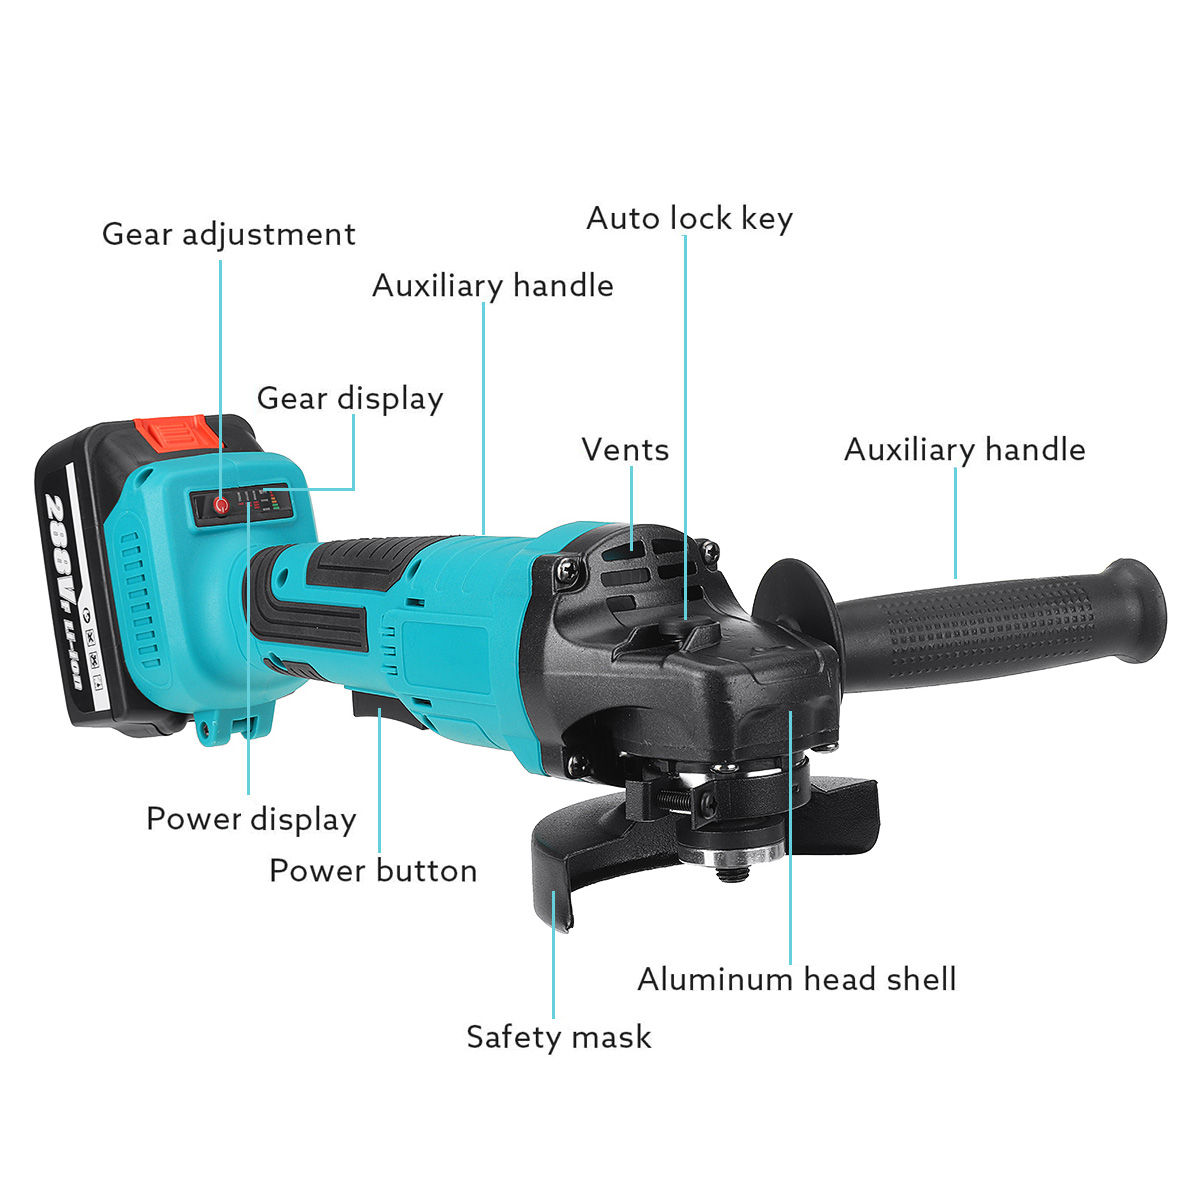 100125mm-Brushless-Cordless-Angle-Grinder-Polisher-Cutting-Tool-W-None12-Battery-For-Makiita-1867833-5